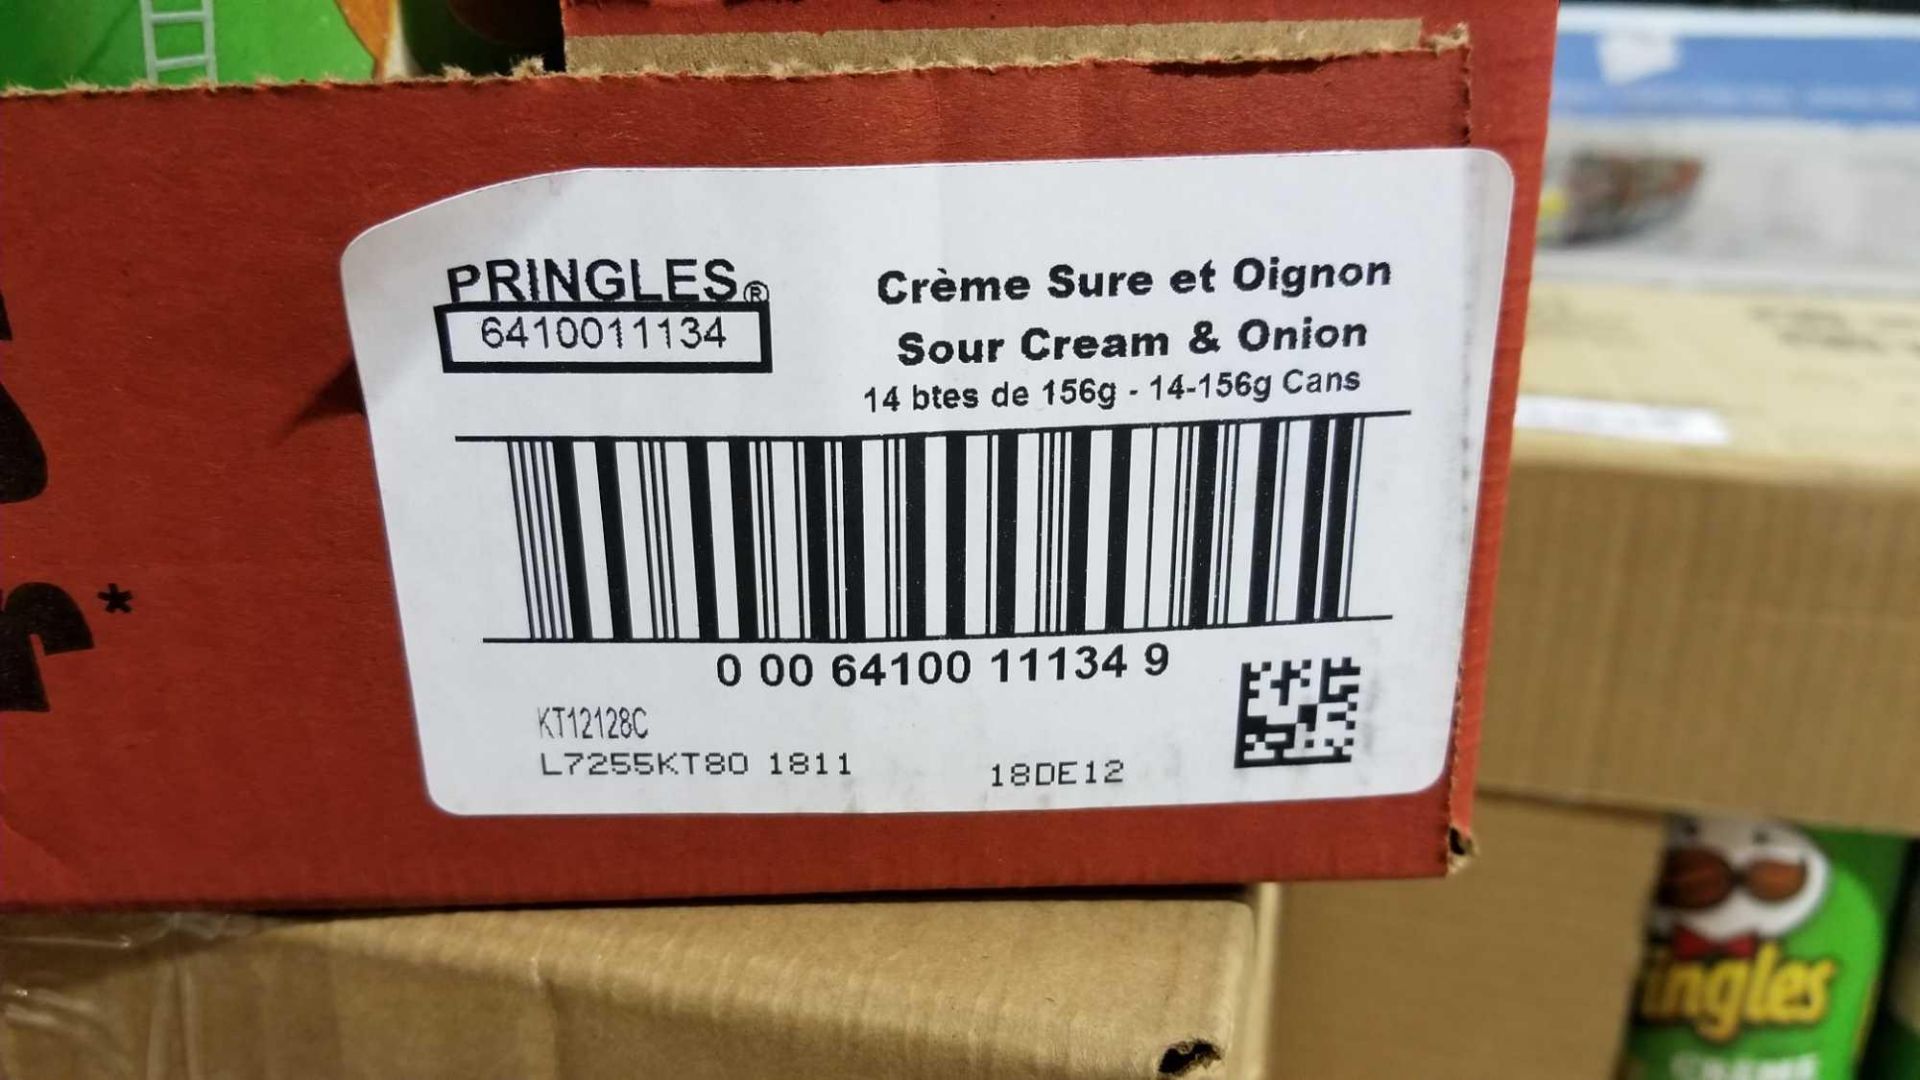 Case of 14 x 156 g Pringles Cans - Sour Cream and Onion - Image 2 of 2